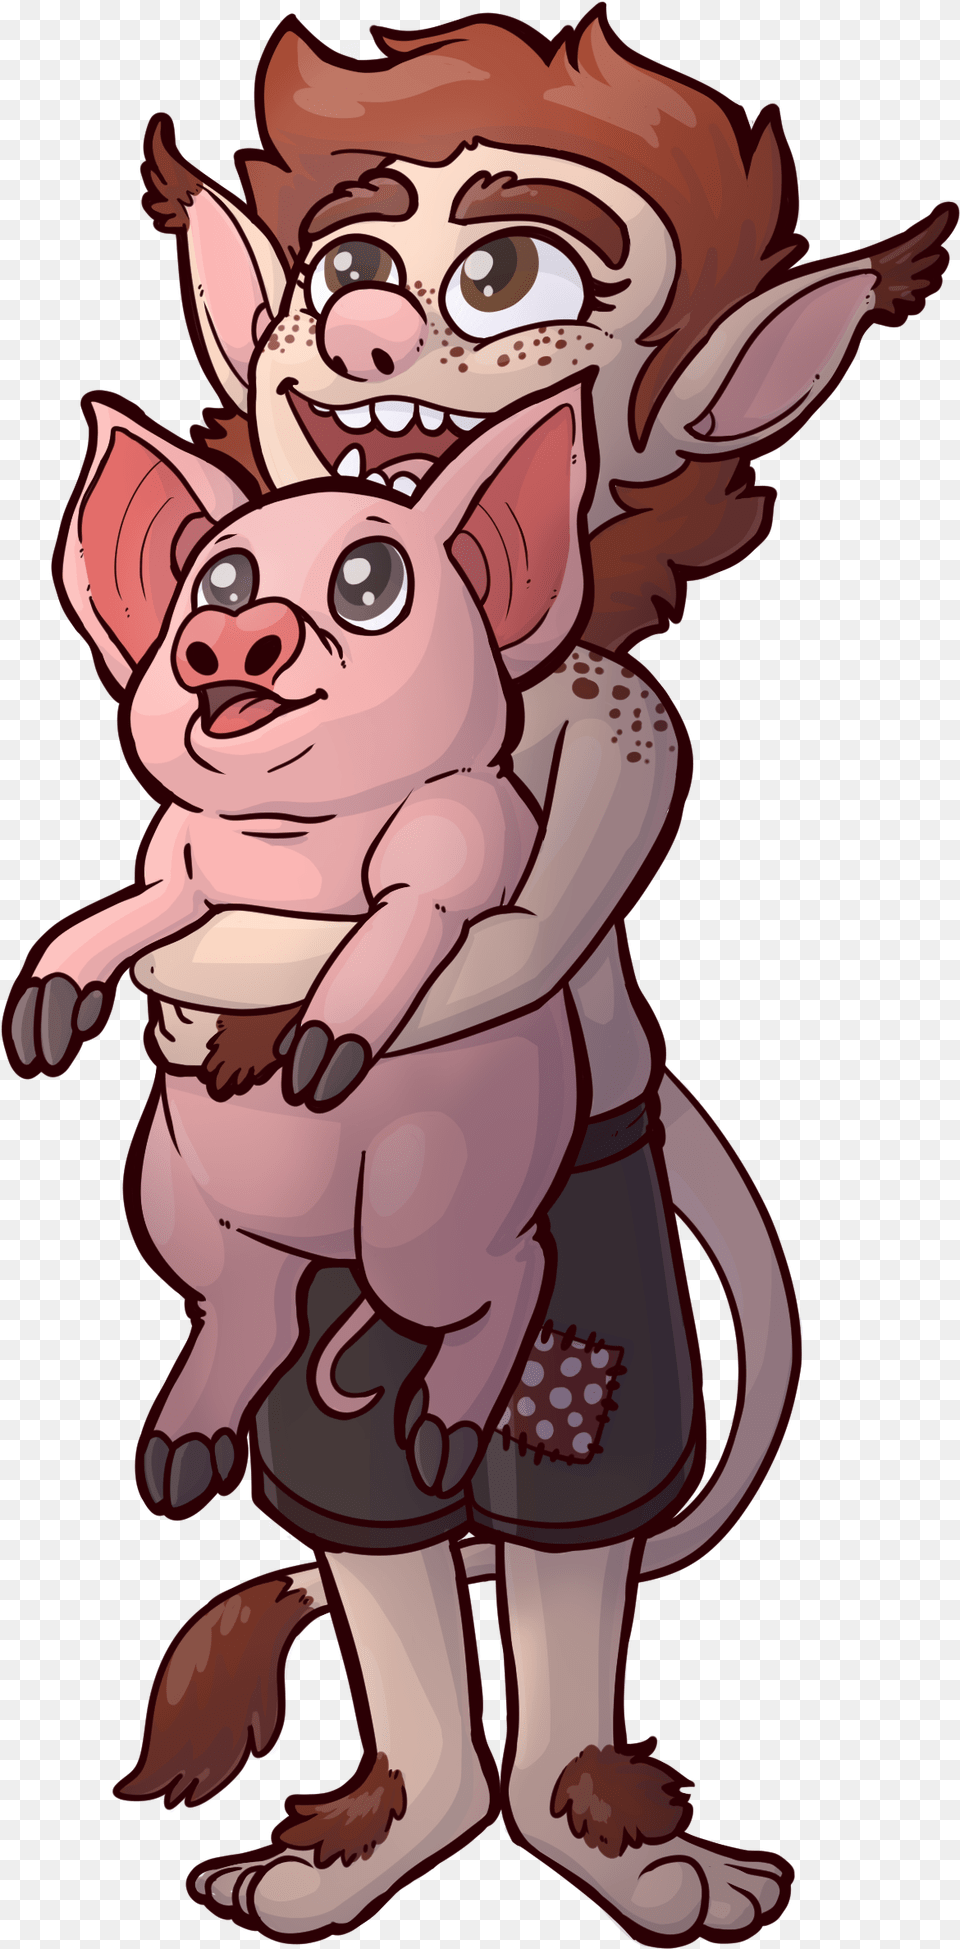 Troll And Pig Pig And Troll, Book, Comics, Publication, Cartoon Png Image